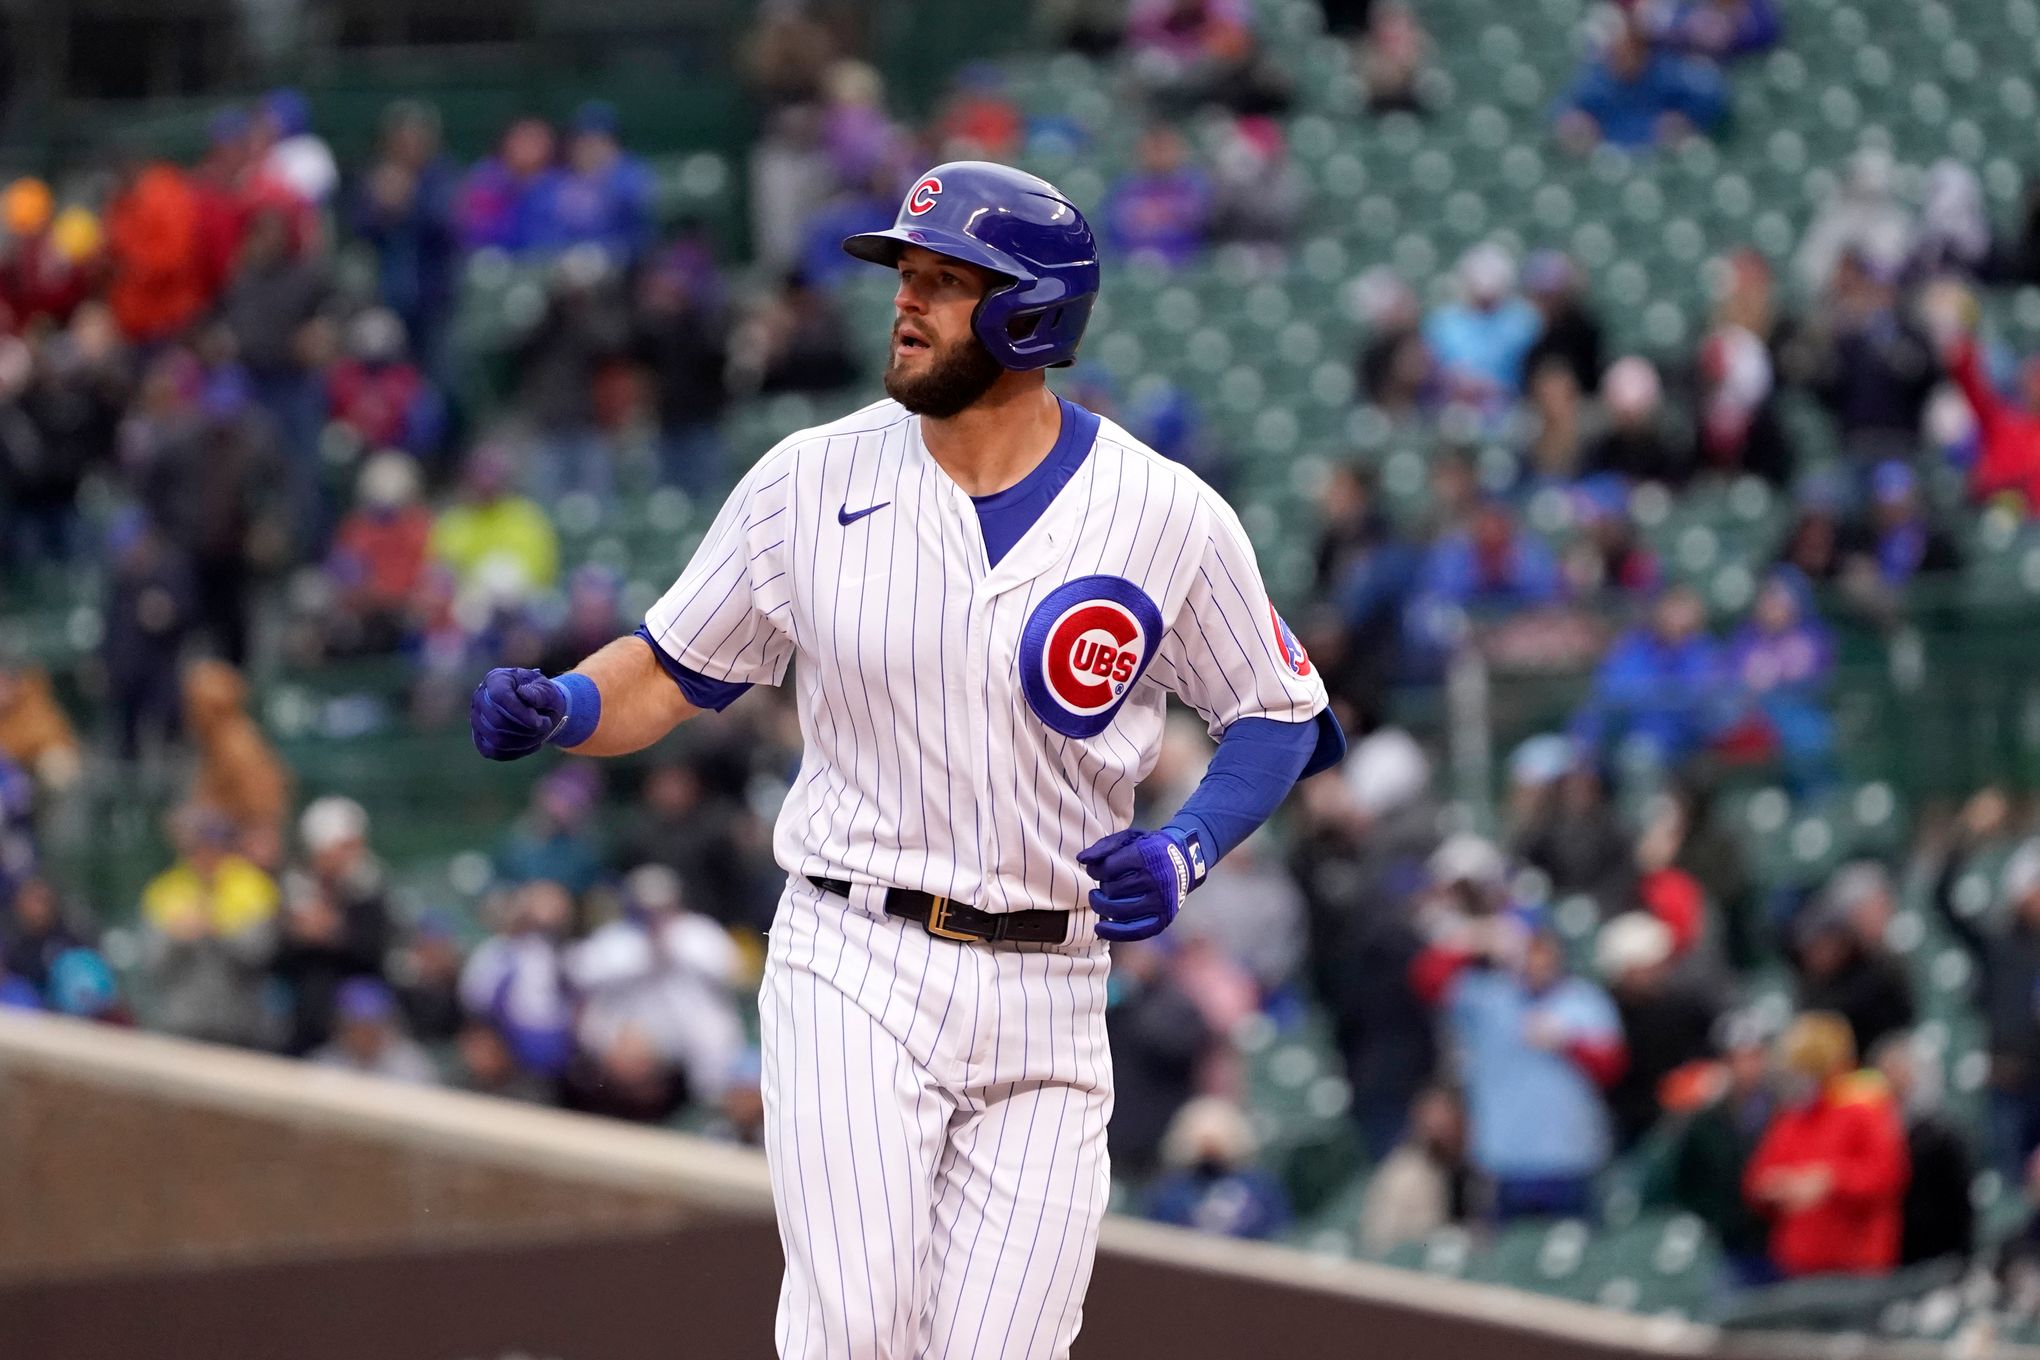 Bote homers, Alzolay dodges jams as Cubs beat Reds 1-0